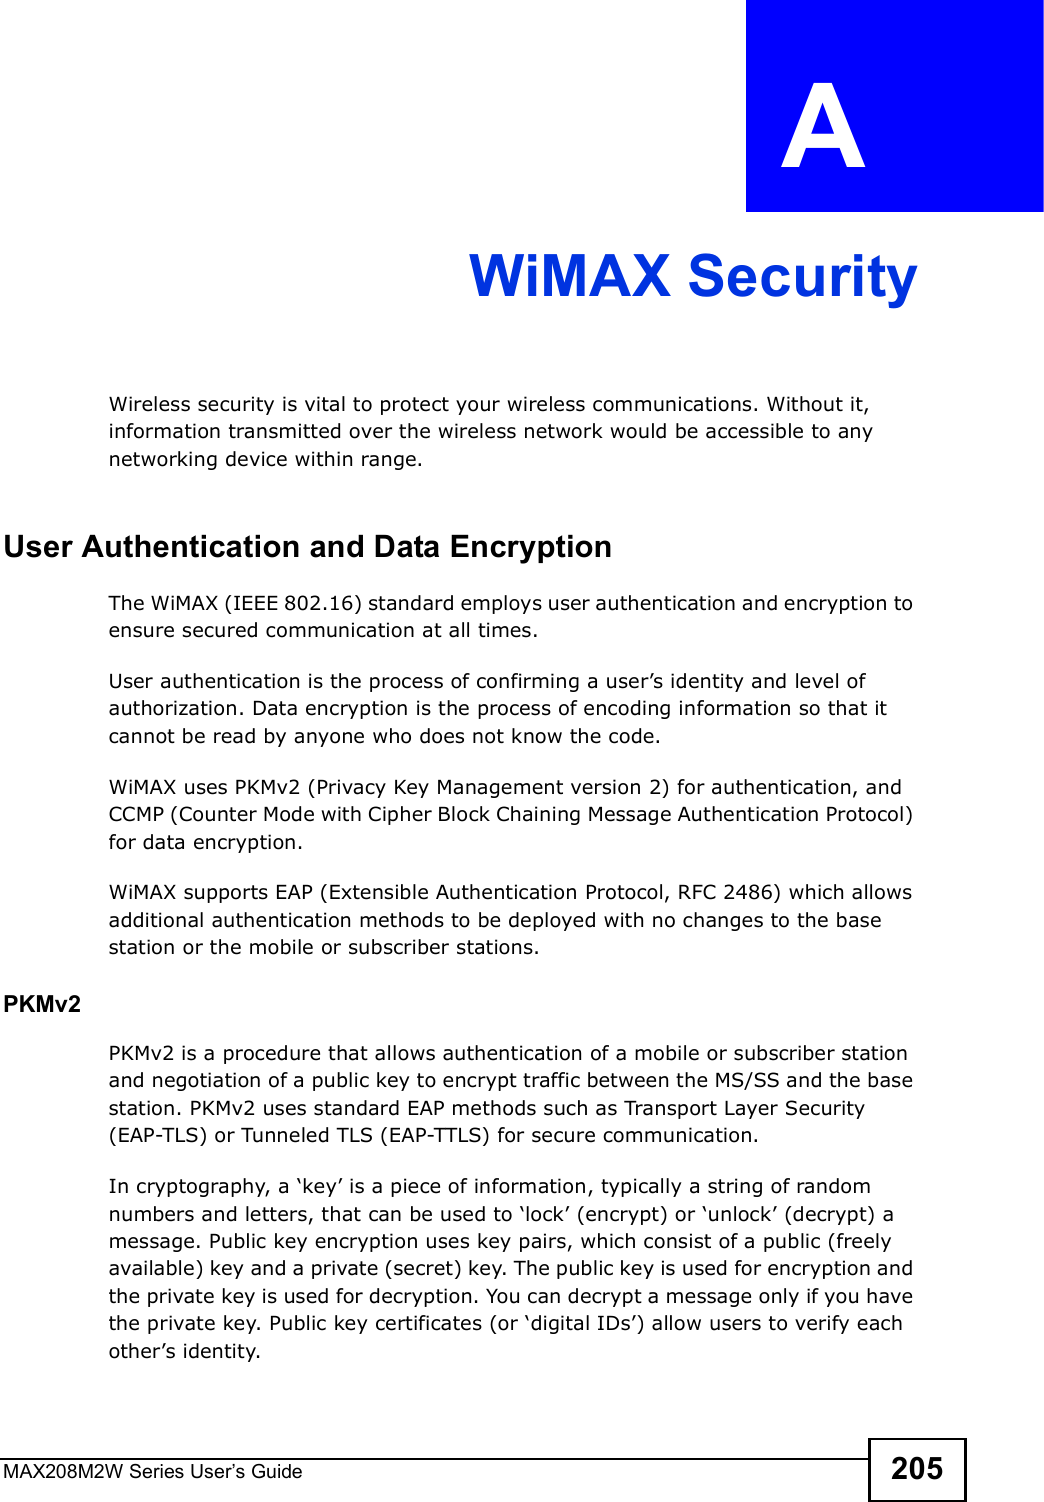 MAX208M2W Series User s Guide 205APPENDIX  A WiMAX SecurityWireless security is vital to protect your wireless communications. Without it, information transmitted over the wireless network would be accessible to any networking device within range.User Authentication and Data EncryptionThe WiMAX (IEEE 802.16) standard employs user authentication and encryption to ensure secured communication at all times.User authentication is the process of confirming a user s identity and level of authorization. Data encryption is the process of encoding information so that it cannot be read by anyone who does not know the code. WiMAX uses PKMv2 (Privacy Key Management version 2) for authentication, and CCMP (Counter Mode with Cipher Block Chaining Message Authentication Protocol) for data encryption. WiMAX supports EAP (Extensible Authentication Protocol, RFC 2486) which allows additional authentication methods to be deployed with no changes to the base station or the mobile or subscriber stations.PKMv2PKMv2 is a procedure that allows authentication of a mobile or subscriber station and negotiation of a public key to encrypt traffic between the MS/SS and the base station. PKMv2 uses standard EAP methods such as Transport Layer Security (EAP-TLS) or Tunneled TLS (EAP-TTLS) for secure communication. In cryptography, a $key  is a piece of information, typically a string of random numbers and letters, that can be used to $lock  (encrypt) or $unlock  (decrypt) a message. Public key encryption uses key pairs, which consist of a public (freely available) key and a private (secret) key. The public key is used for encryption and the private key is used for decryption. You can decrypt a message only if you have the private key. Public key certificates (or $digital IDs ) allow users to verify each other s identity. 